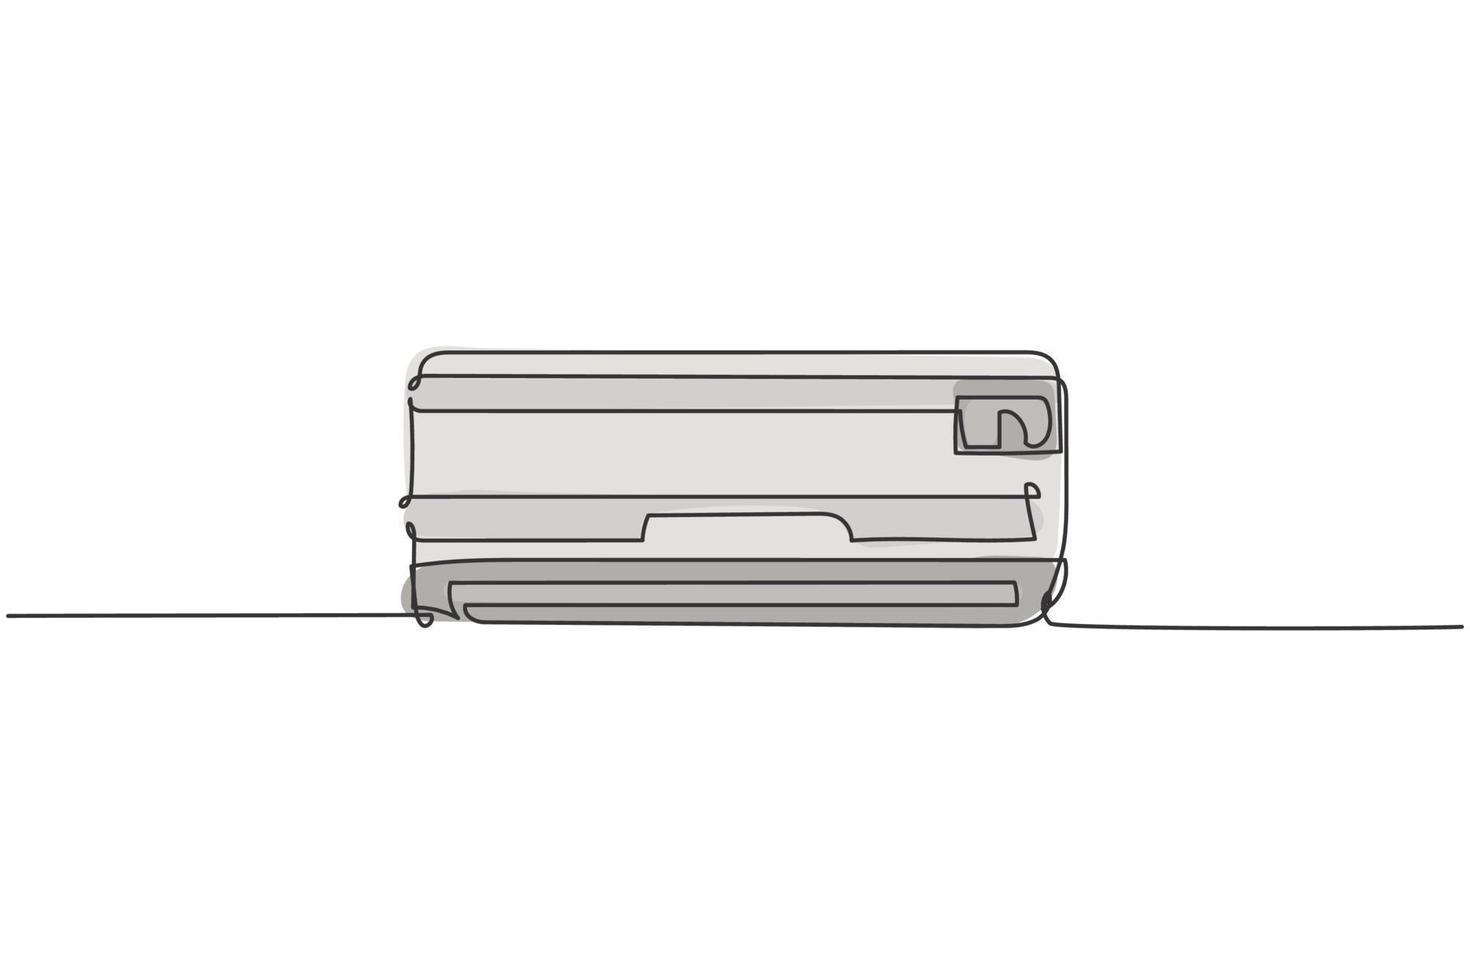 Single continuous line drawing of wall air conditioner household utensil. Electronic living room home appliance concept. Modern one line draw design graphic vector illustration